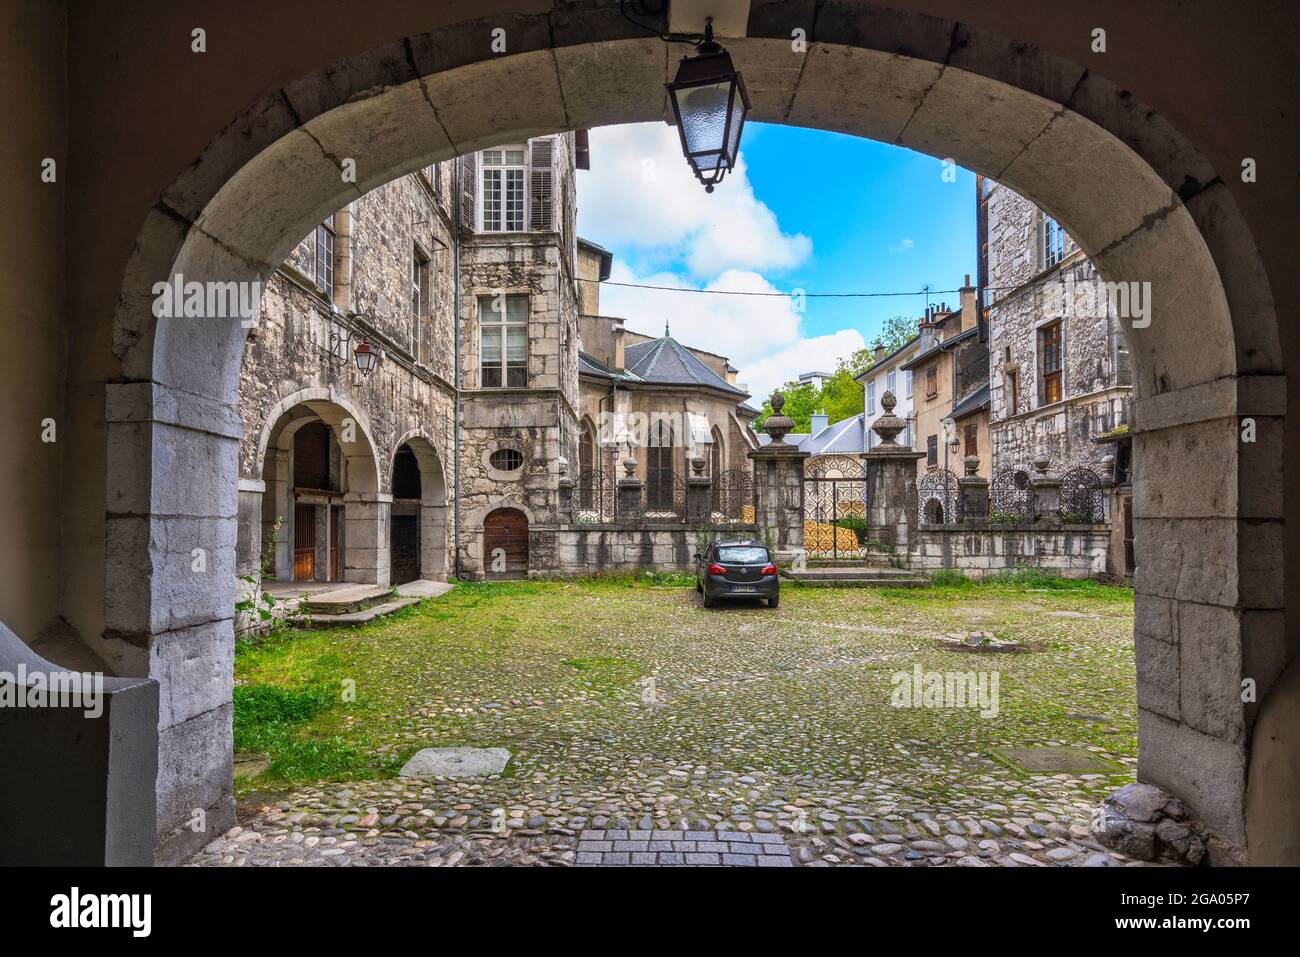 Covered access to an ancient courtyard near the cathedral of San Francesco de Sales in Chambery. Chambery, Auvergne-Rhône-Alpes region, France Stock Photo